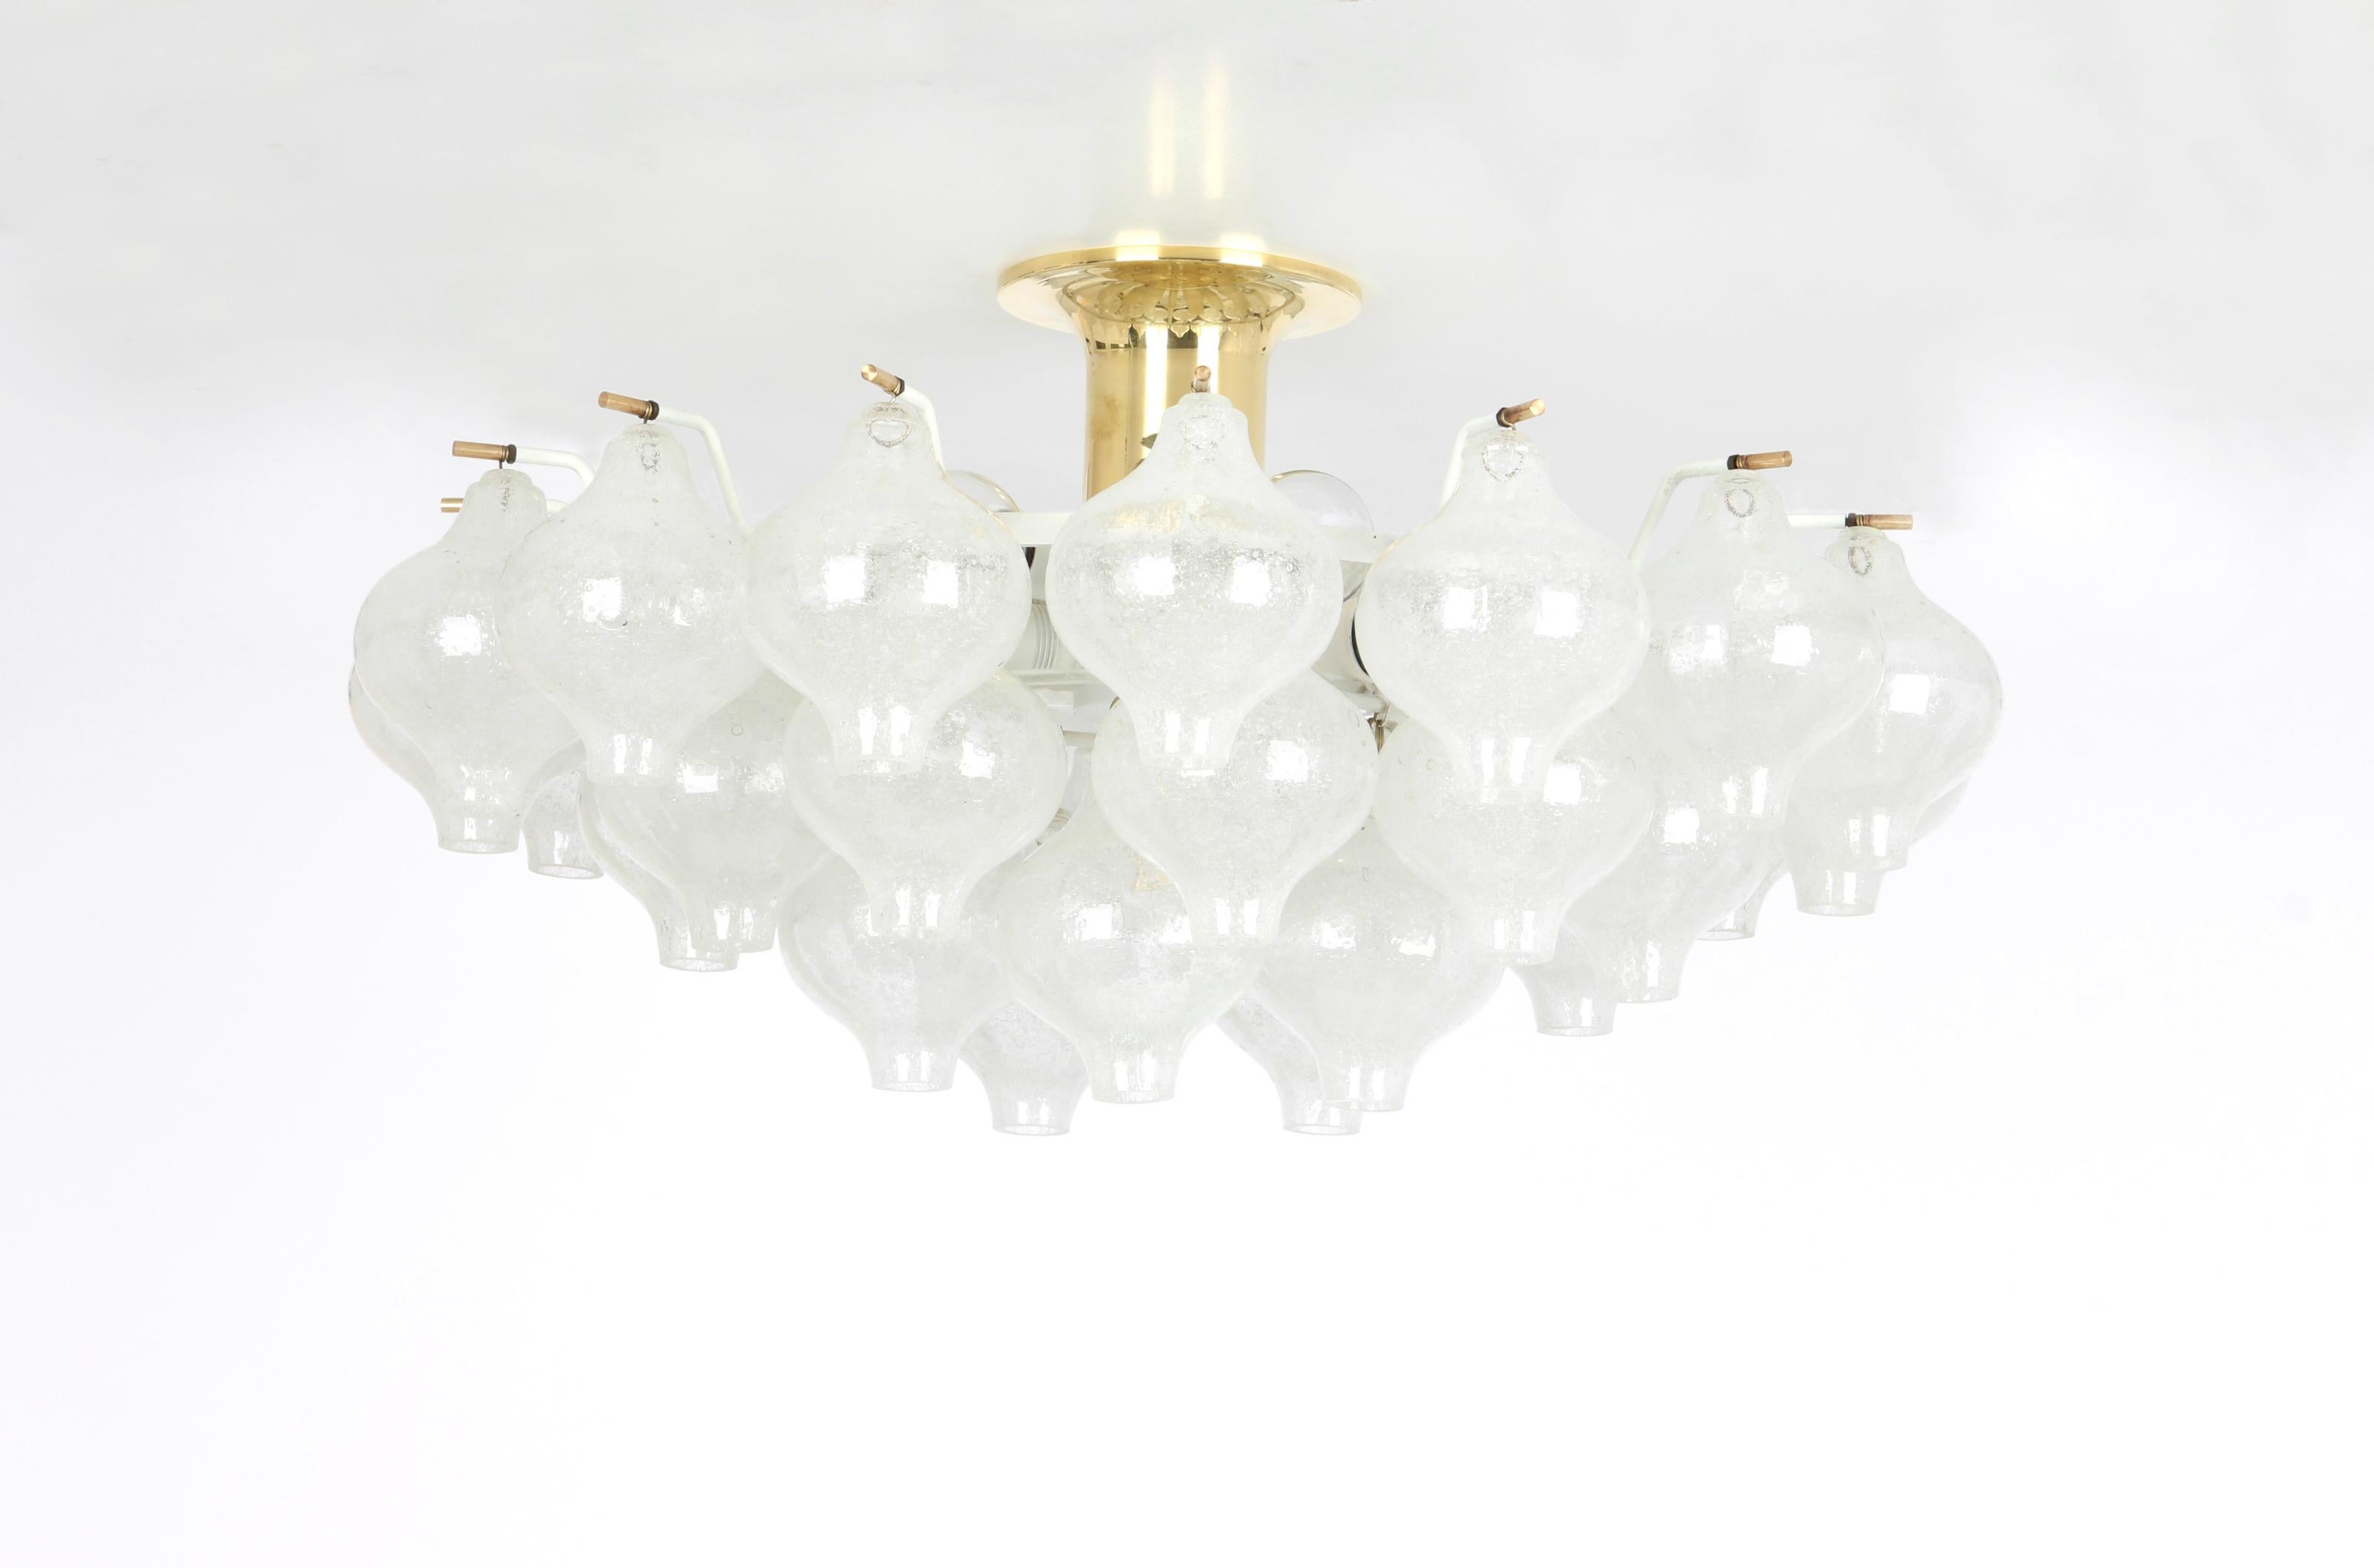 Wonderful onion-shaped -Tulipan glass chandelier. 30 hand blown glasses suspended on a white painted metal frame.
Best of design from the 1960s by Kalmar, Austria. High quality of the materials.

Sockets: The chandelier takes 9 small screw base